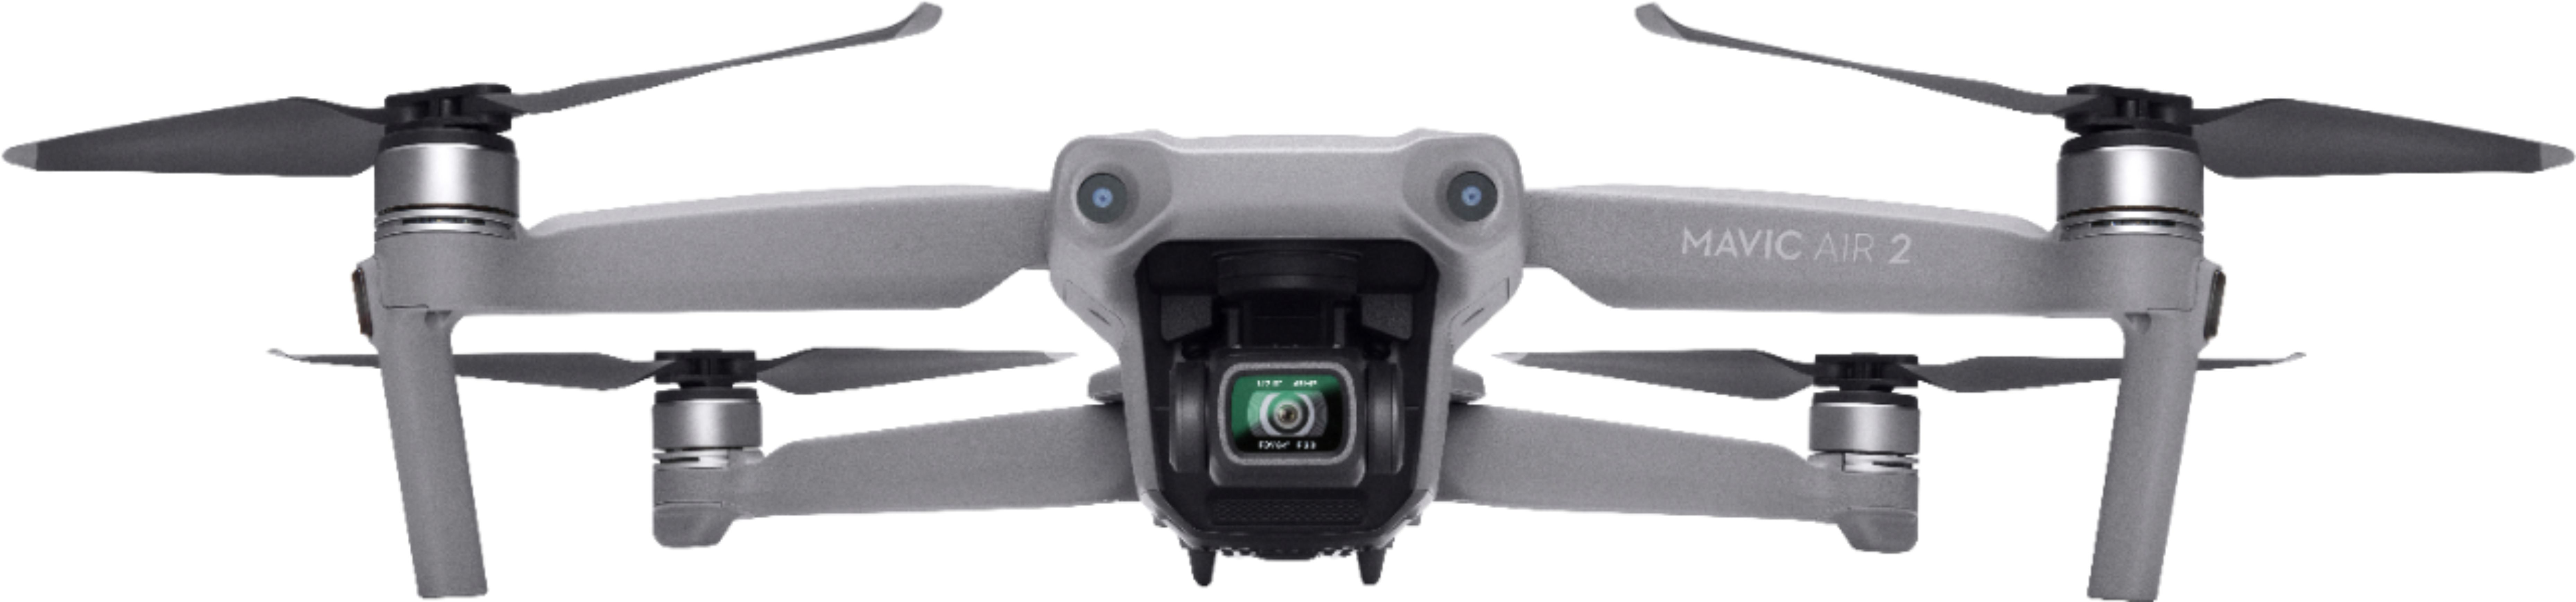 Dji Mavic Air 2 Drone Fly More Combo With Remote Controller Black Cp Ma 00000167 03 Best Buy